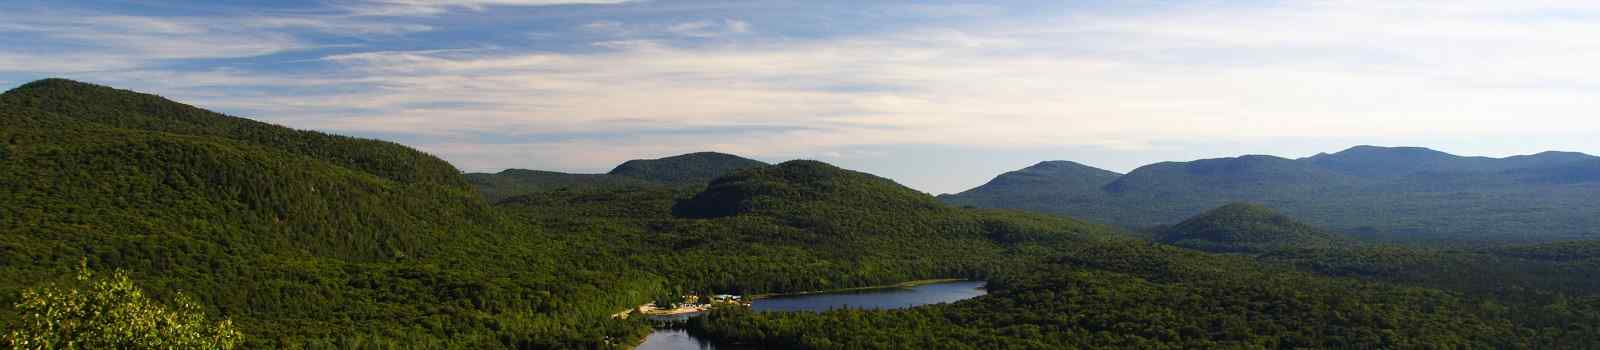 PARKS-EAST -Kanada Lac Monroe in Mont-Tremblant national park